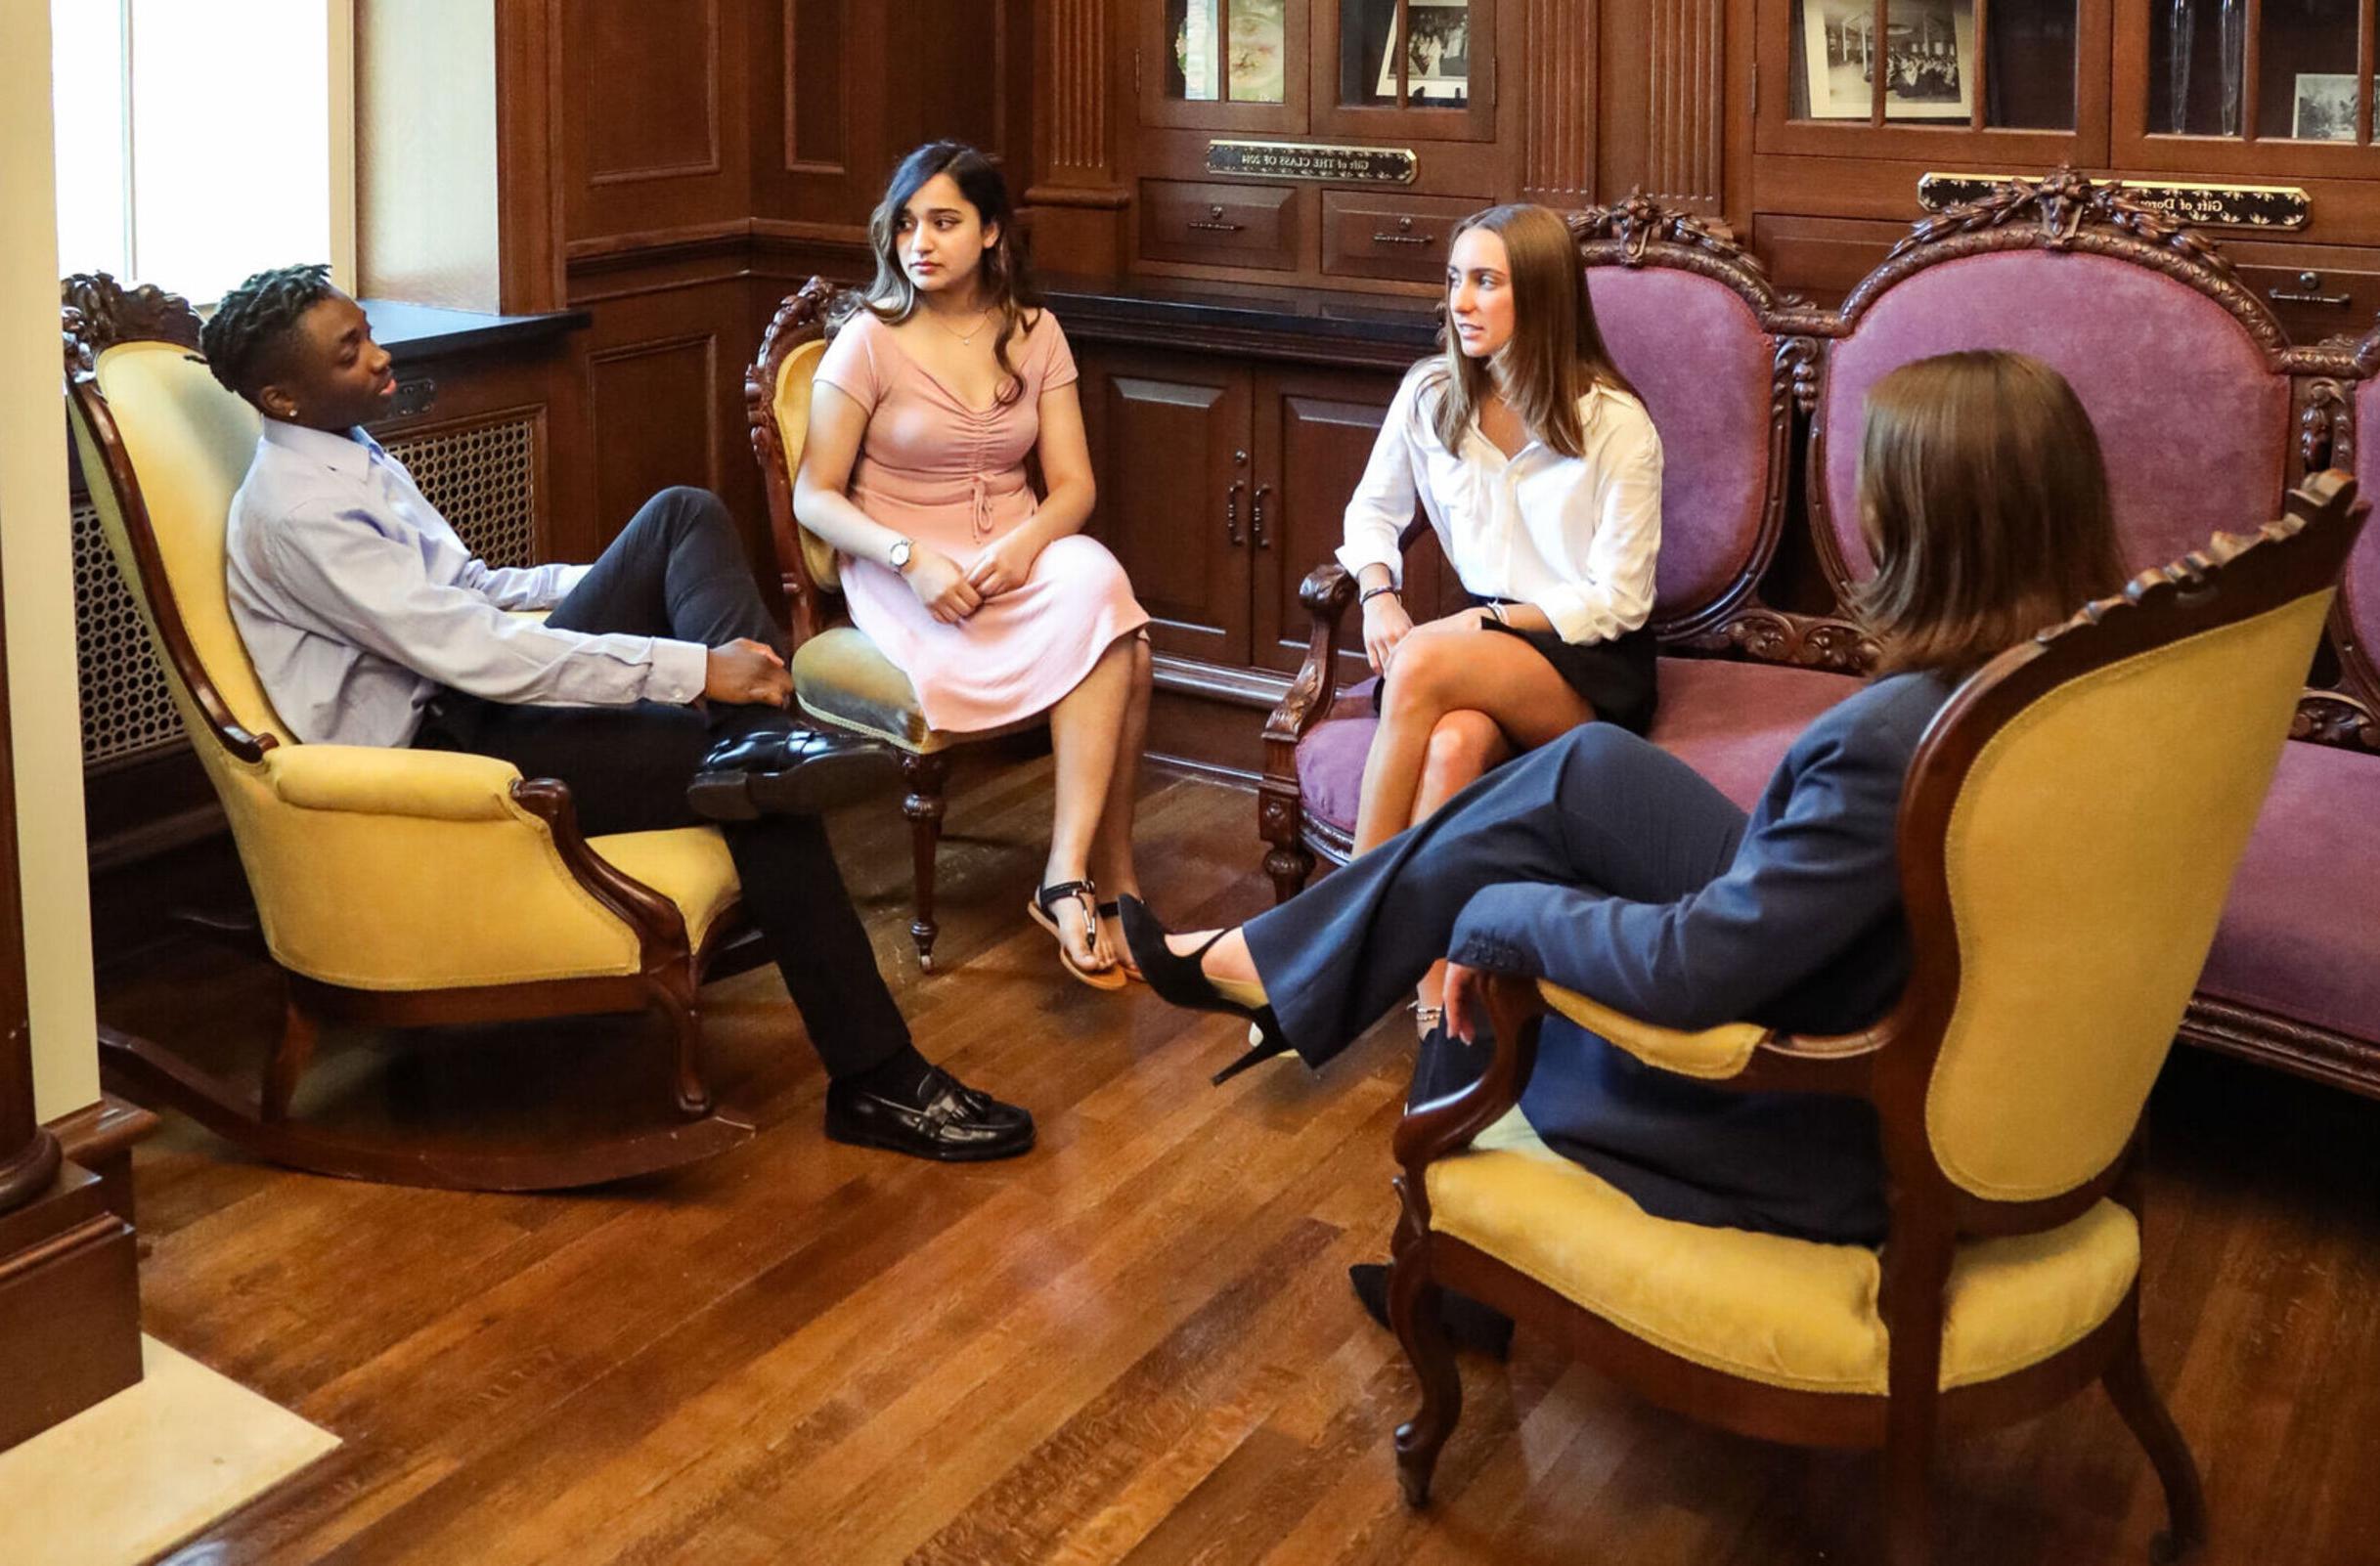 Four business students meet in a comfortable lounge area